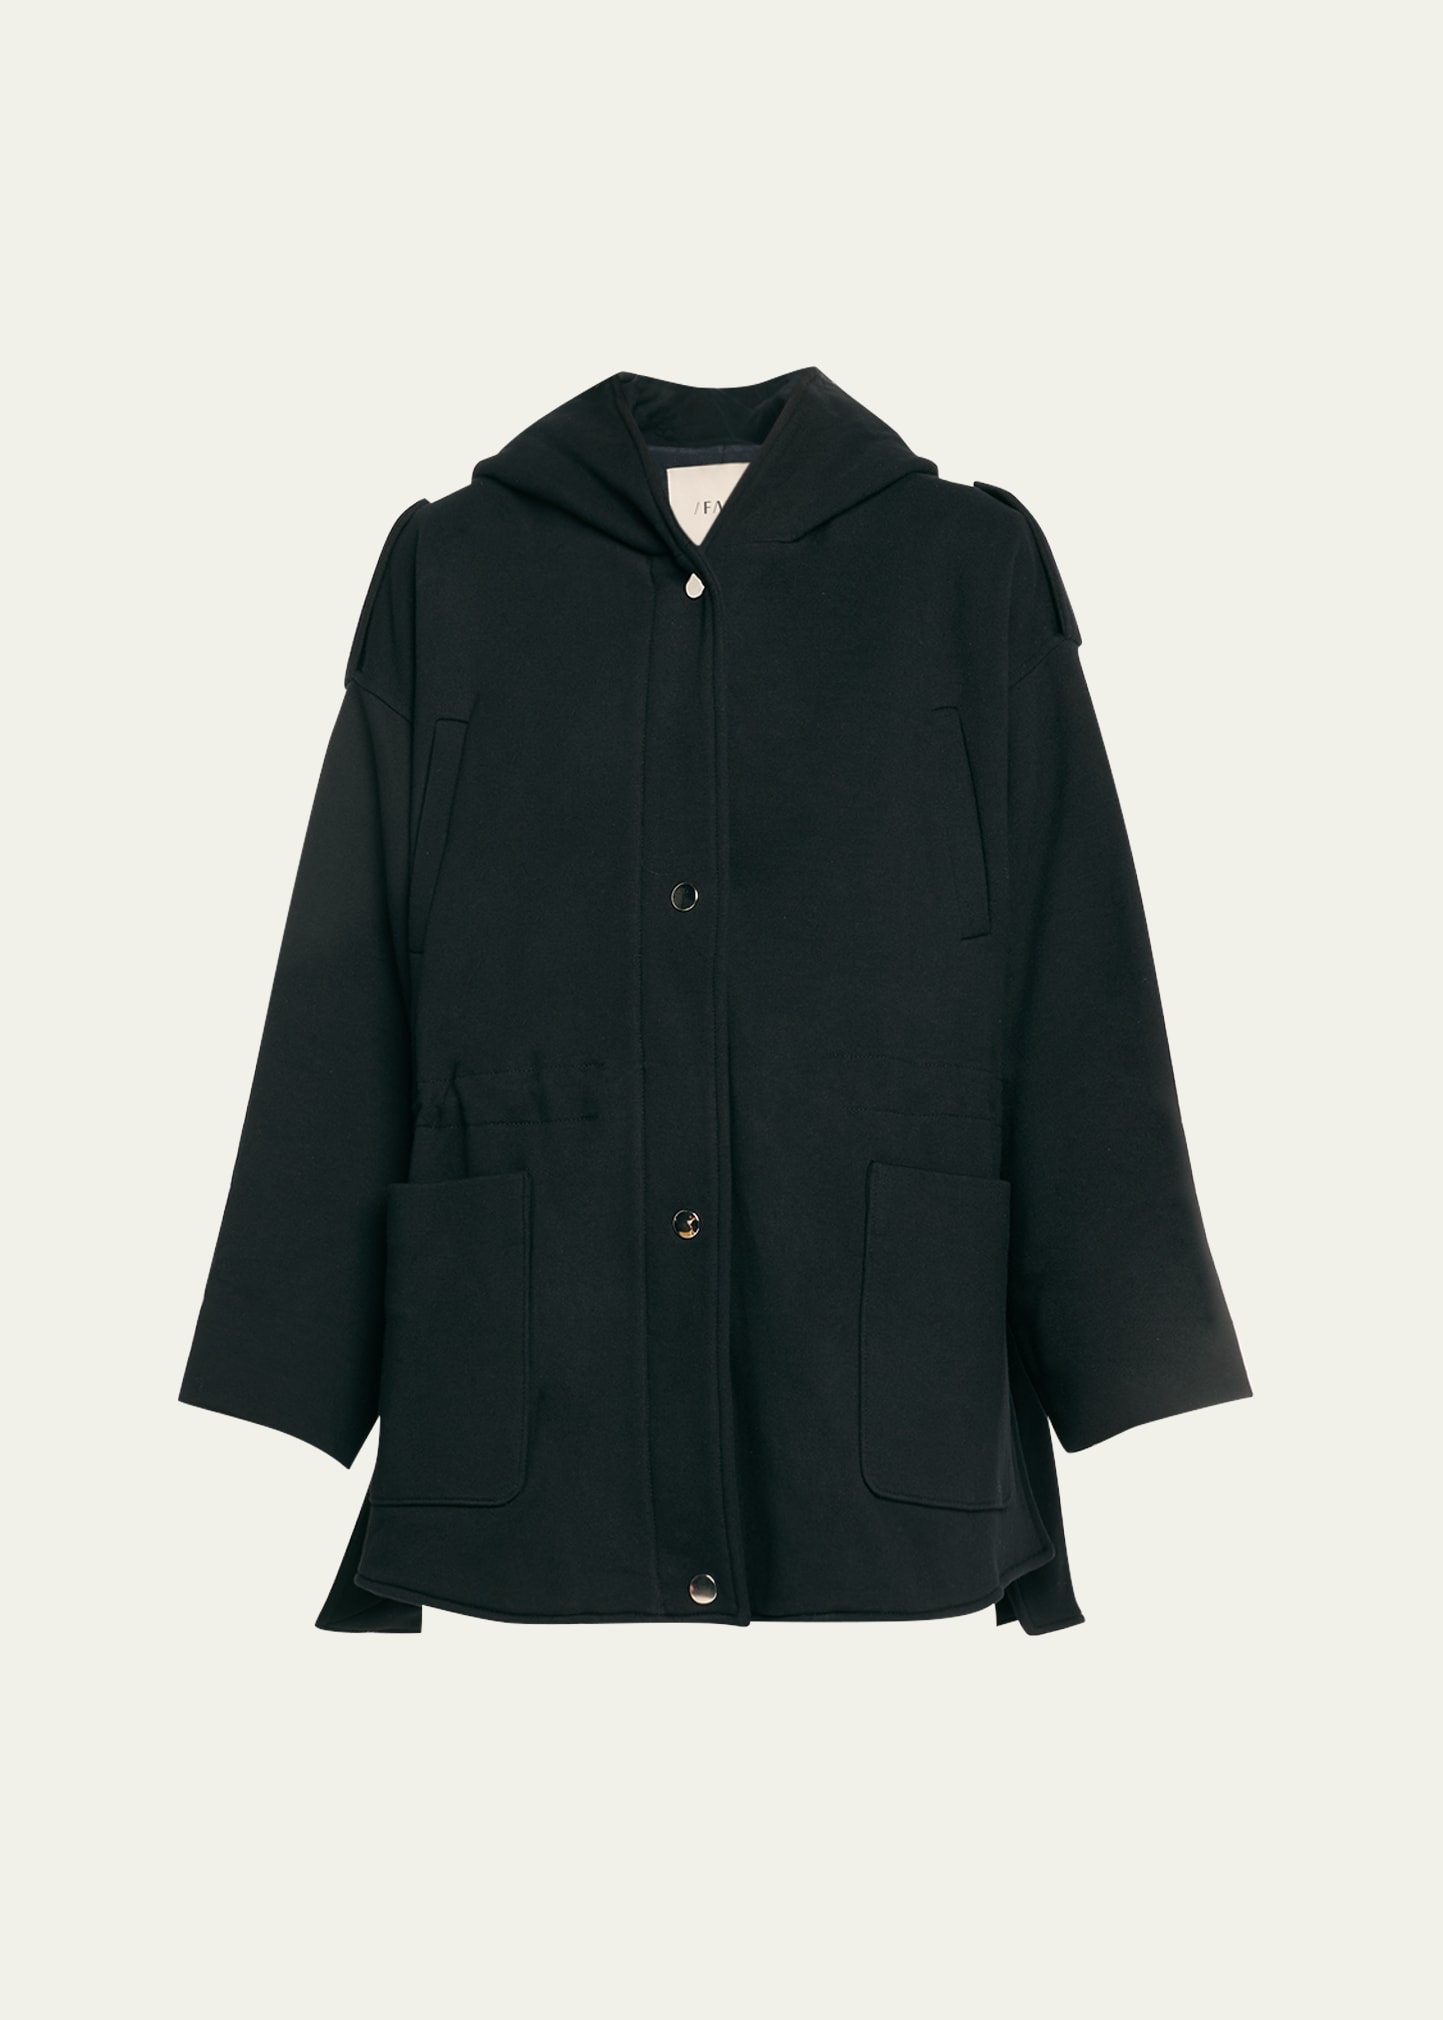 Faz Ruby Hooded Top Coat With Drawcord Waist In Black